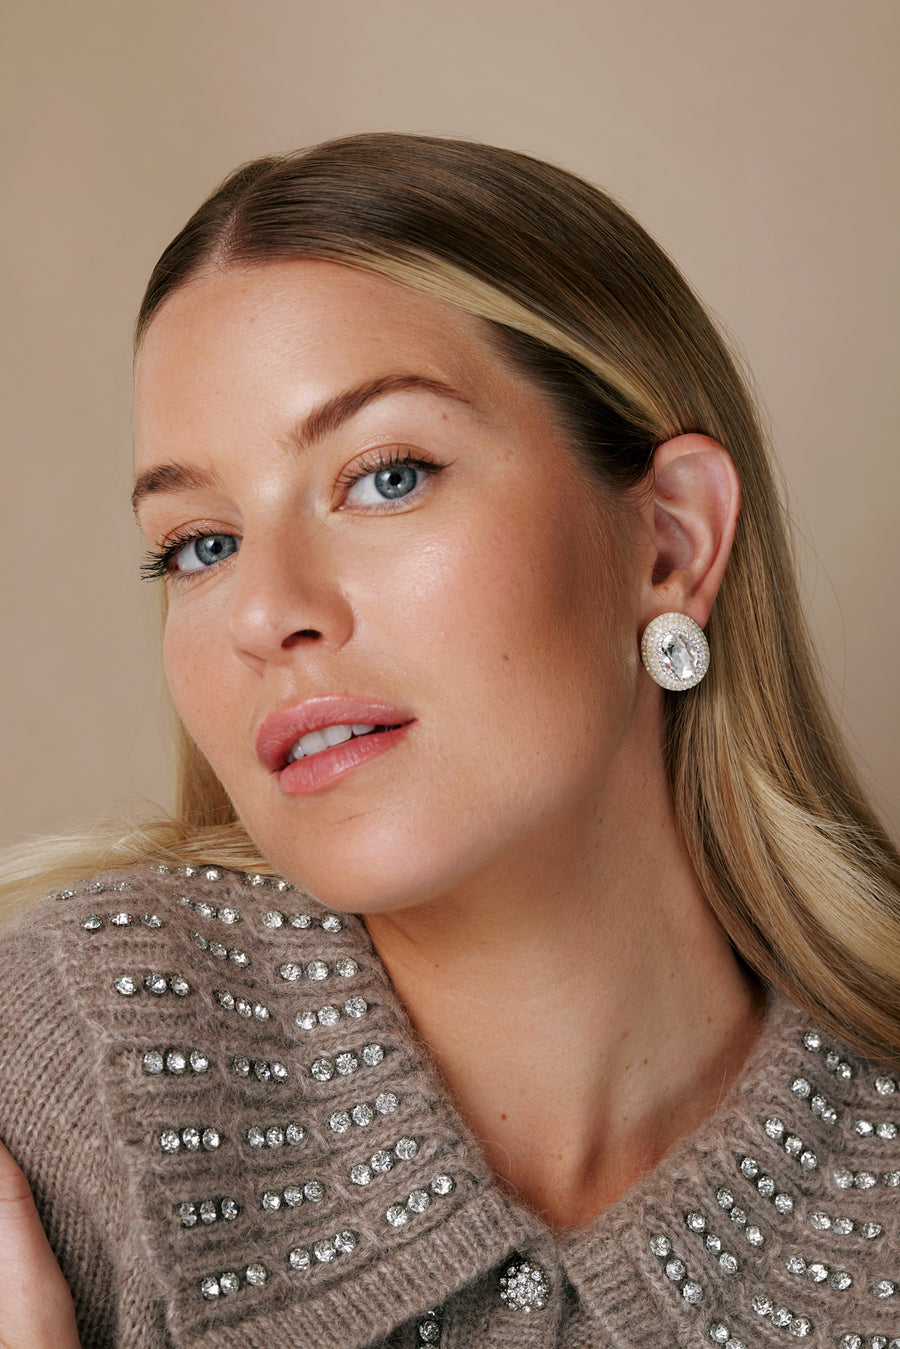 model shot showing the oval crystal stud earrings from the side 